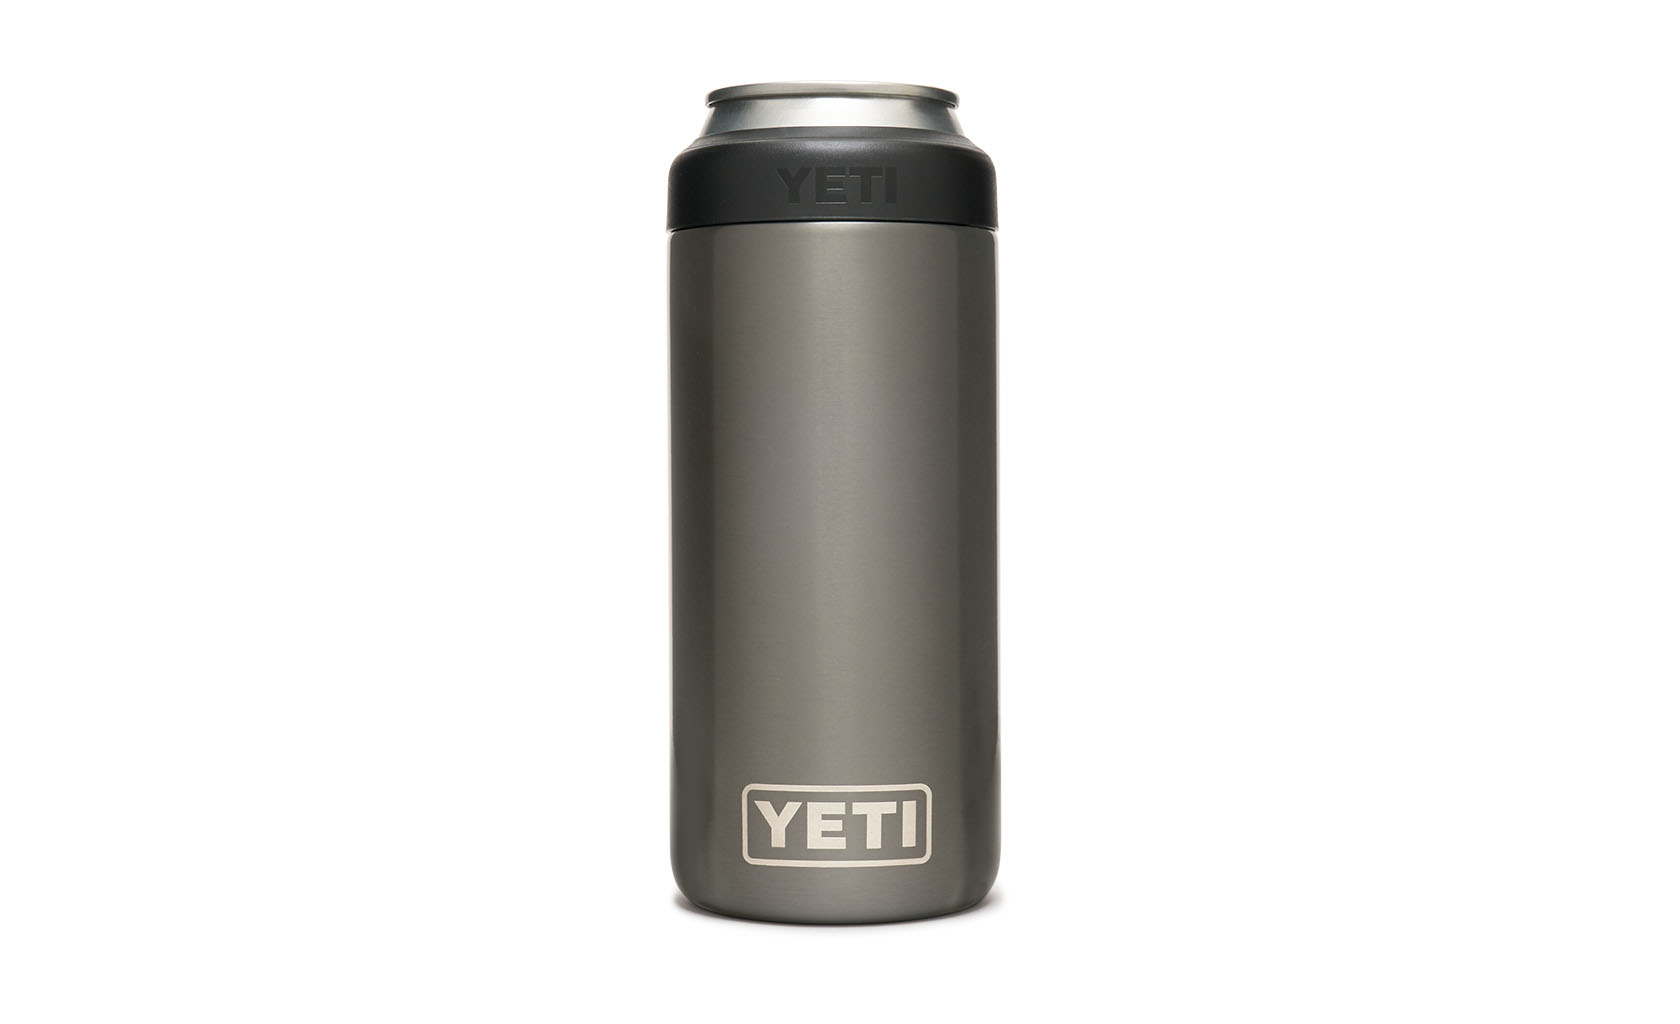  YETI Rambler 12 oz. Colster Slim Can Insulator for the Slim  Hard Seltzer Cans, Seafoam (NO CAN INSERT): Home & Kitchen